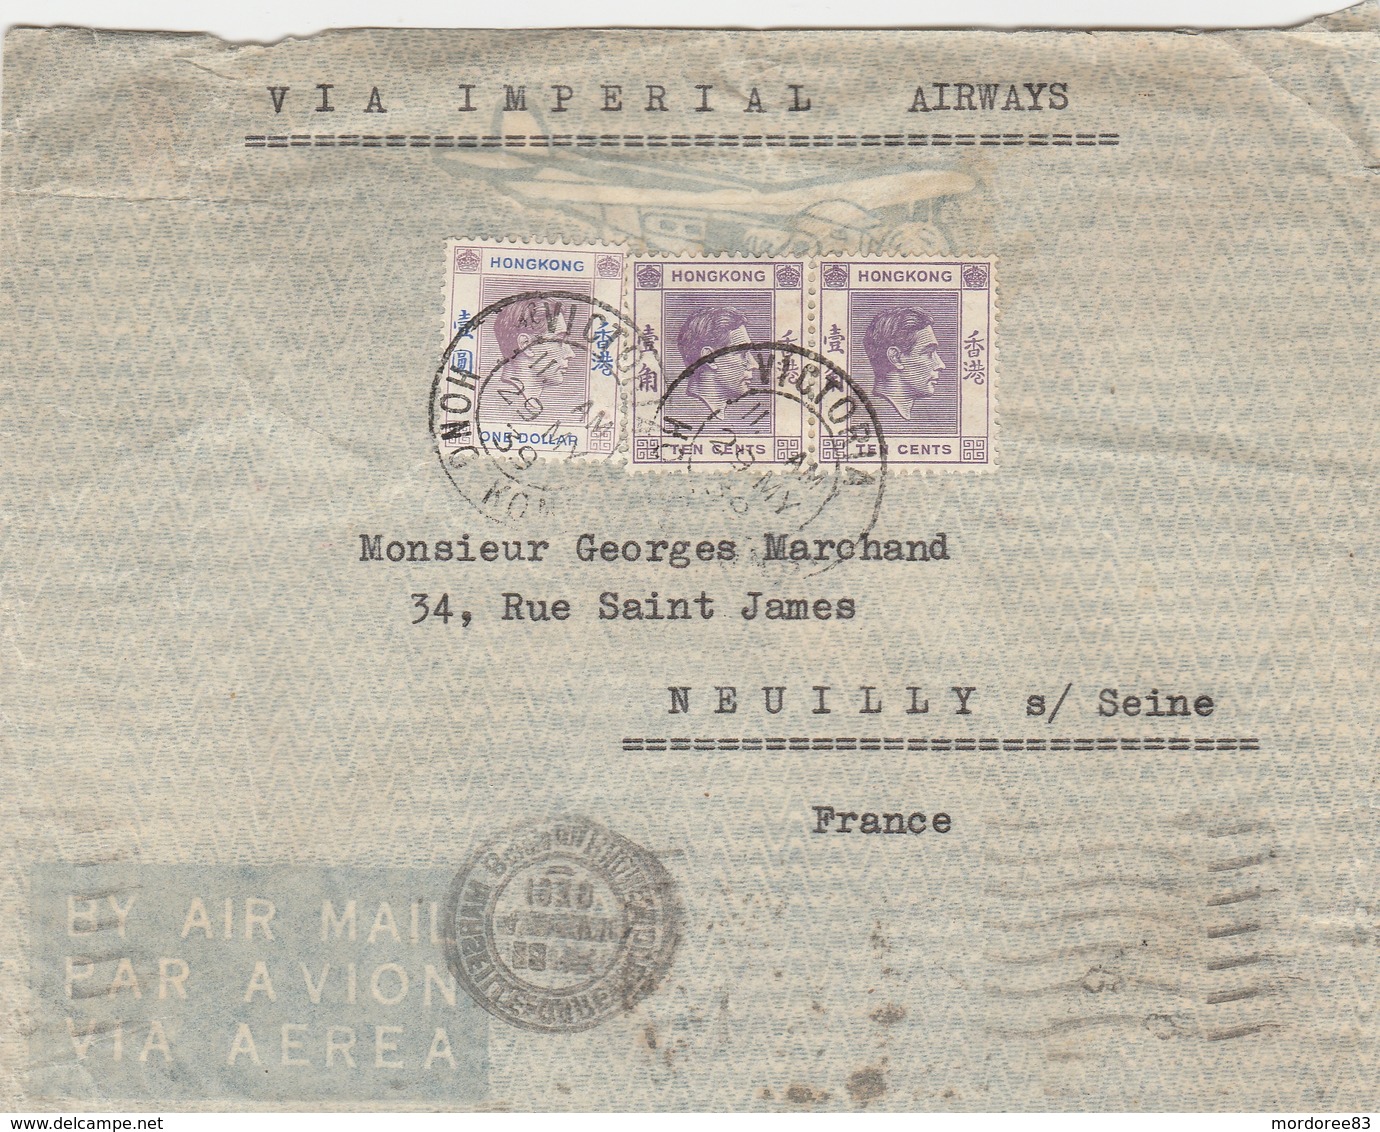 HONG KONG GEORGE VI 1 DOLLAR + PAIRE 10 C YT 153+145 SUR LETTRE VIA IMPERIAL AIRWAYS VICTORIA 29/5/39 FRANCE NEUILLY S/S - Cartas & Documentos